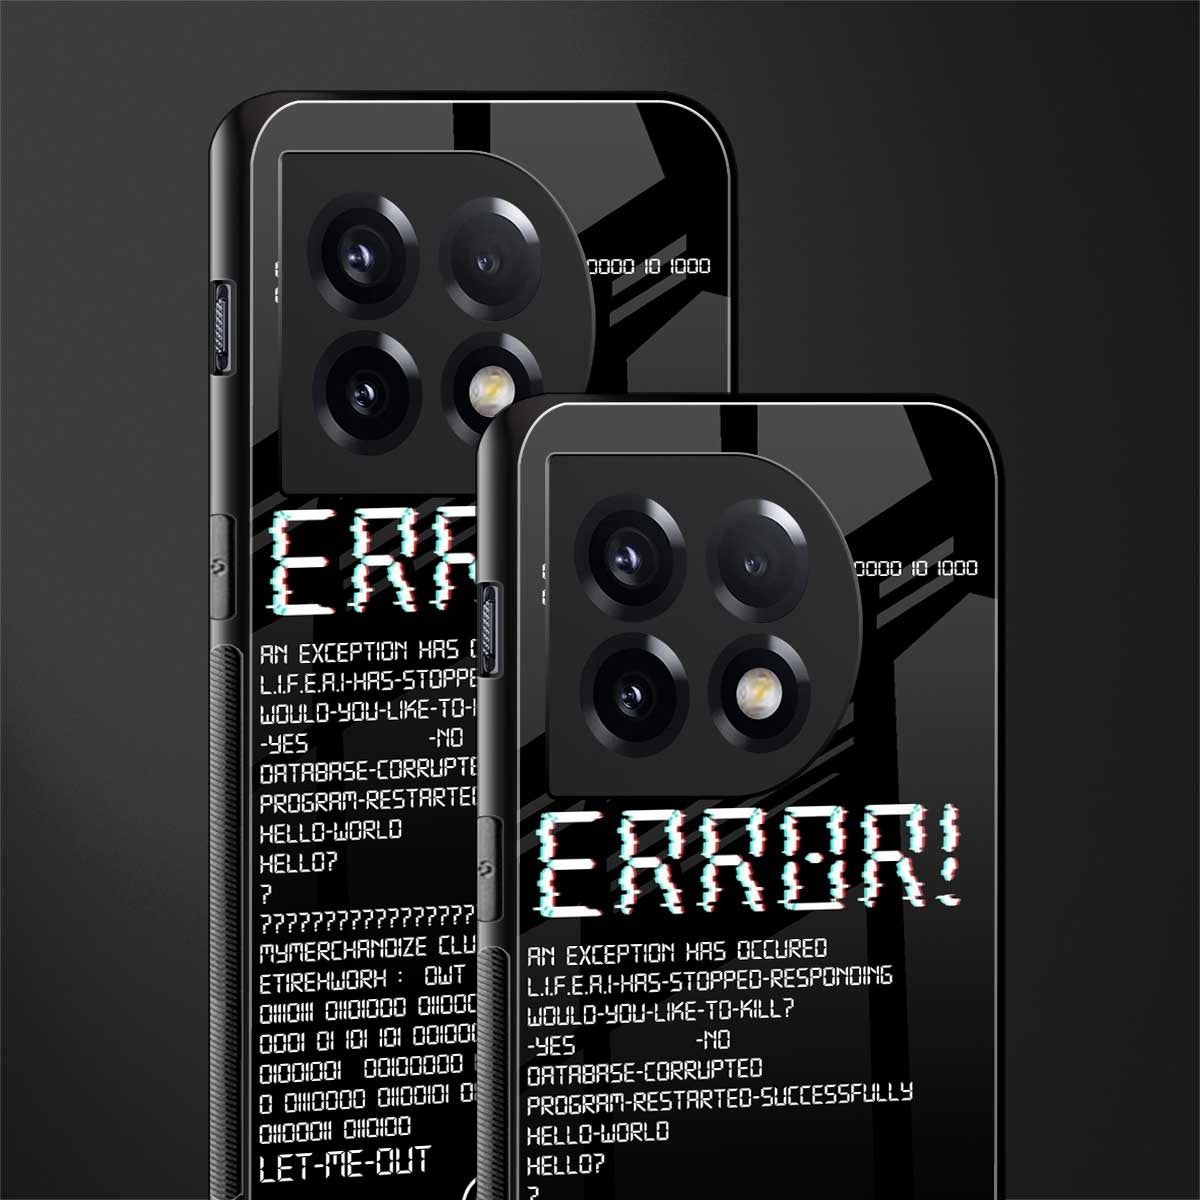 error back phone cover | glass case for oneplus 11